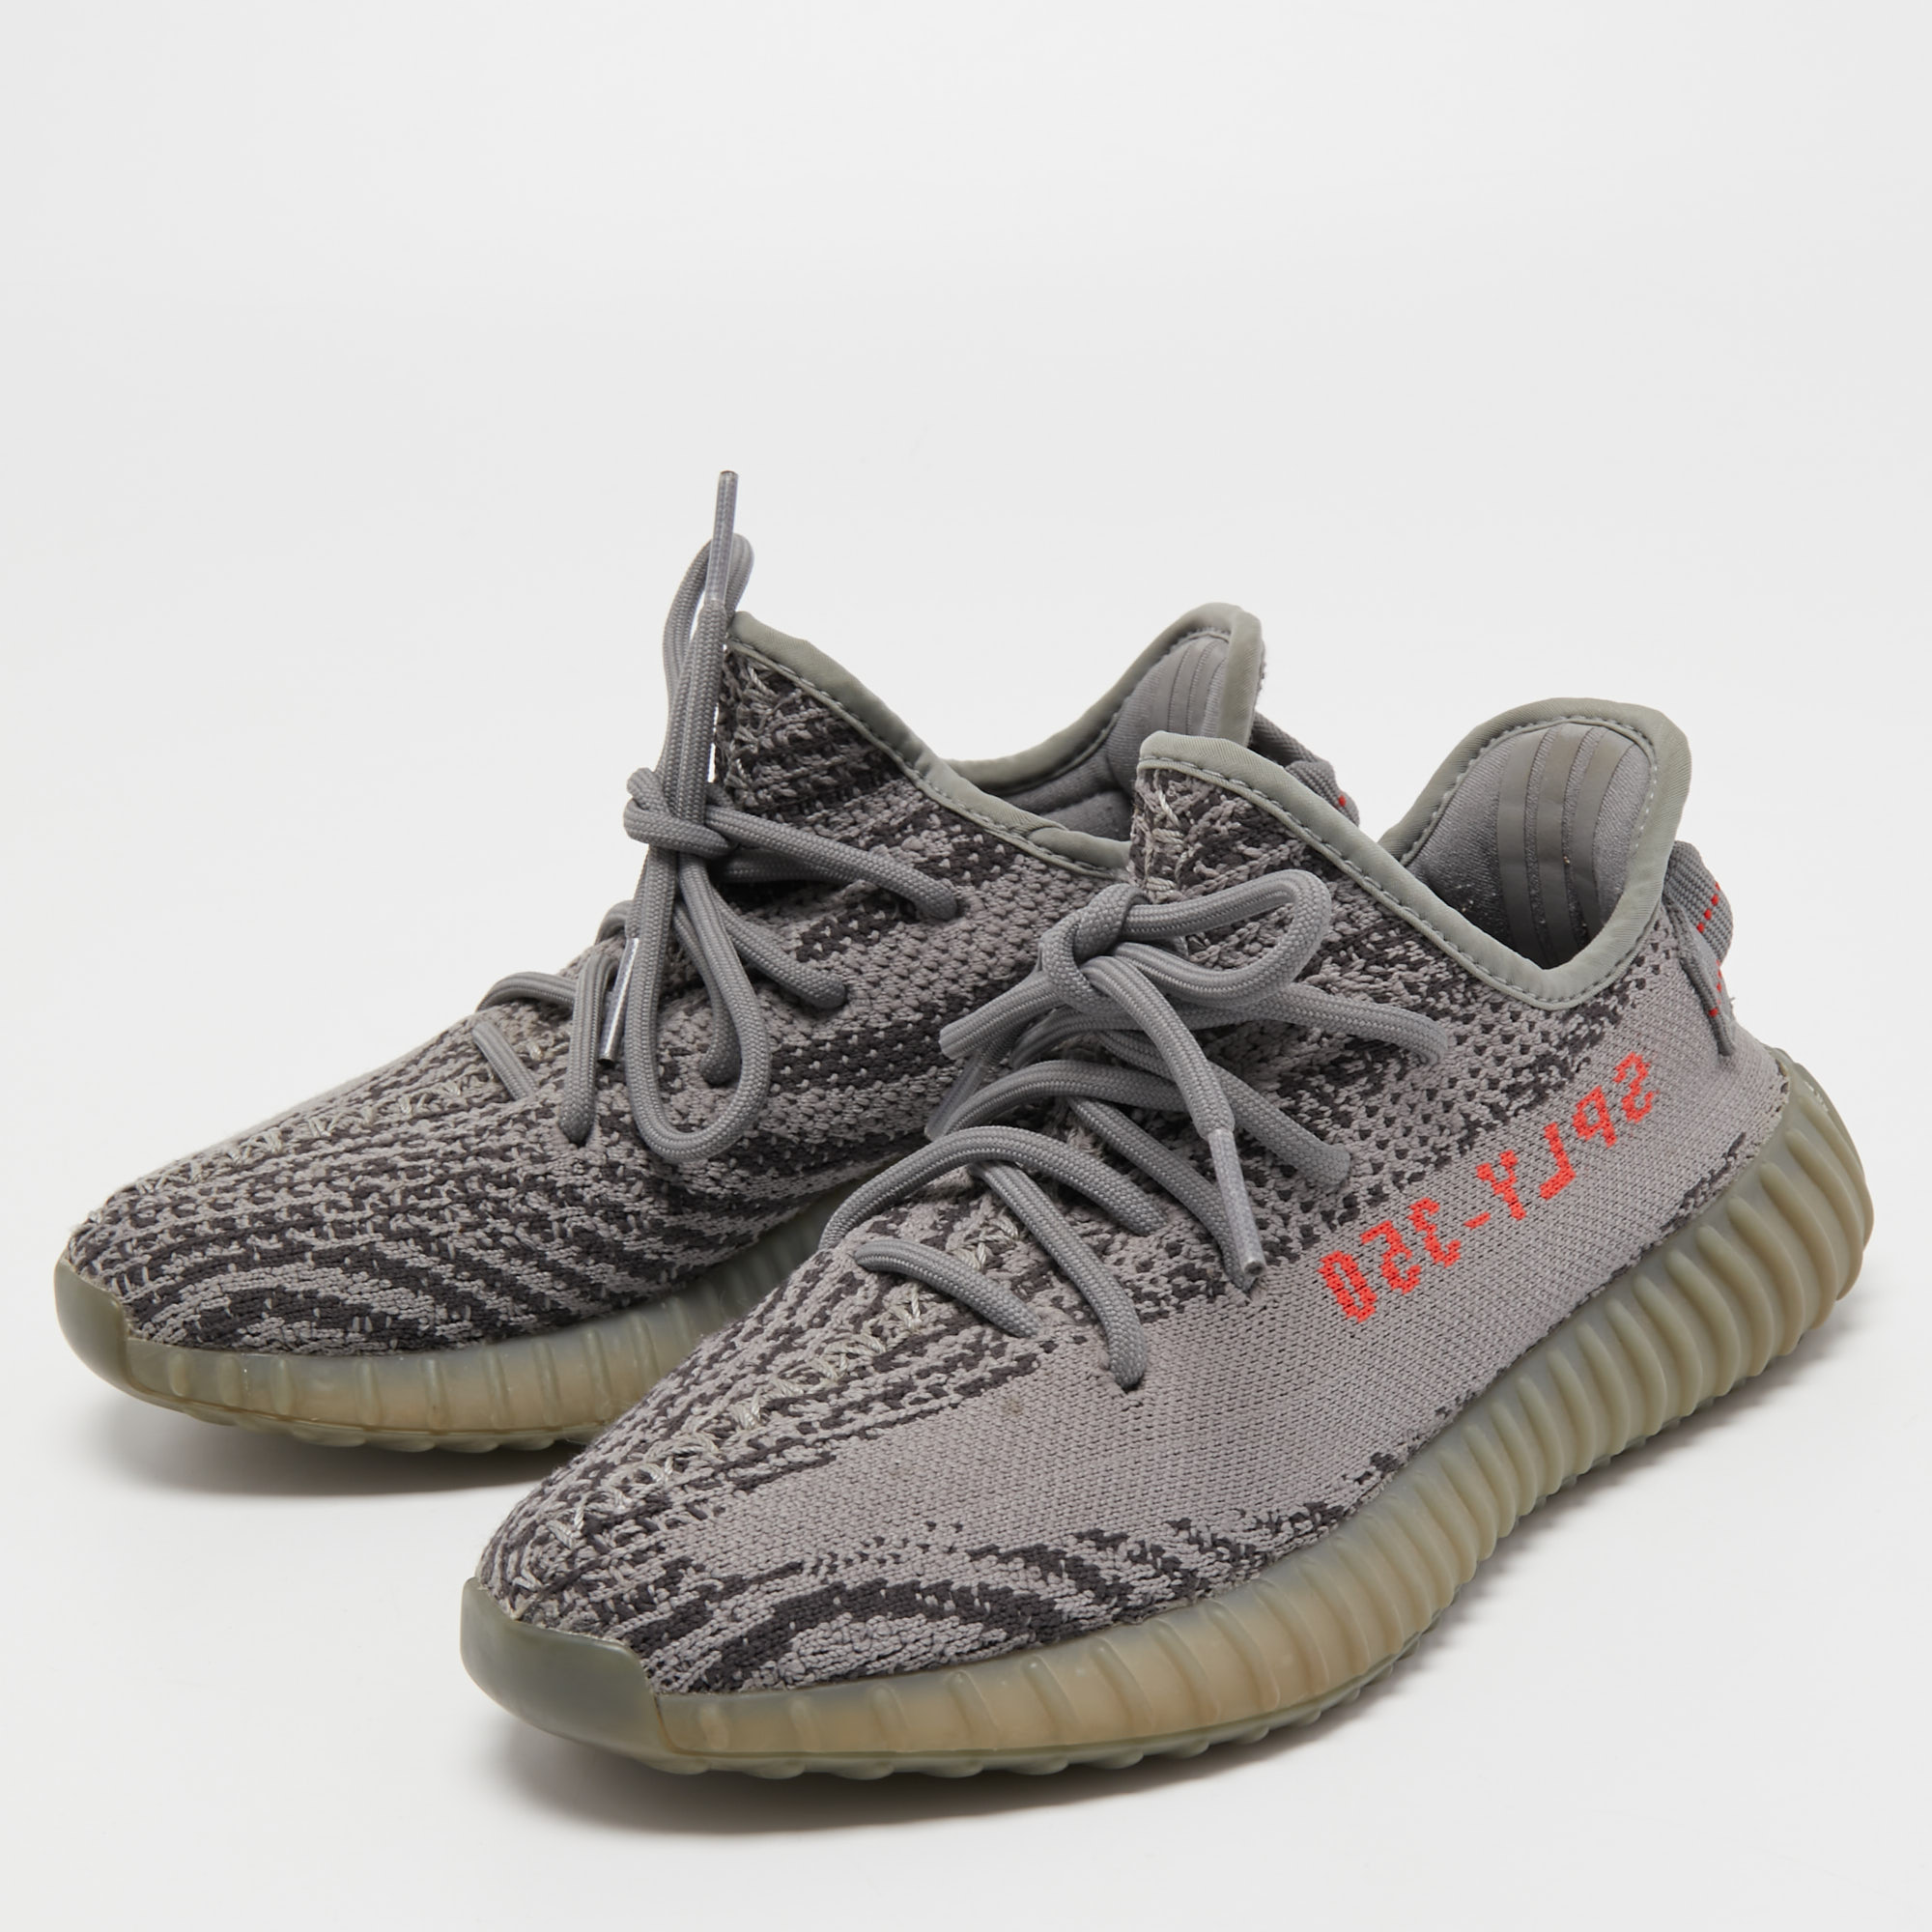 

Yeezy x Adidas Grey Knit Fabric Boost 350 V2 Beluga 2.0 Sneakers Size